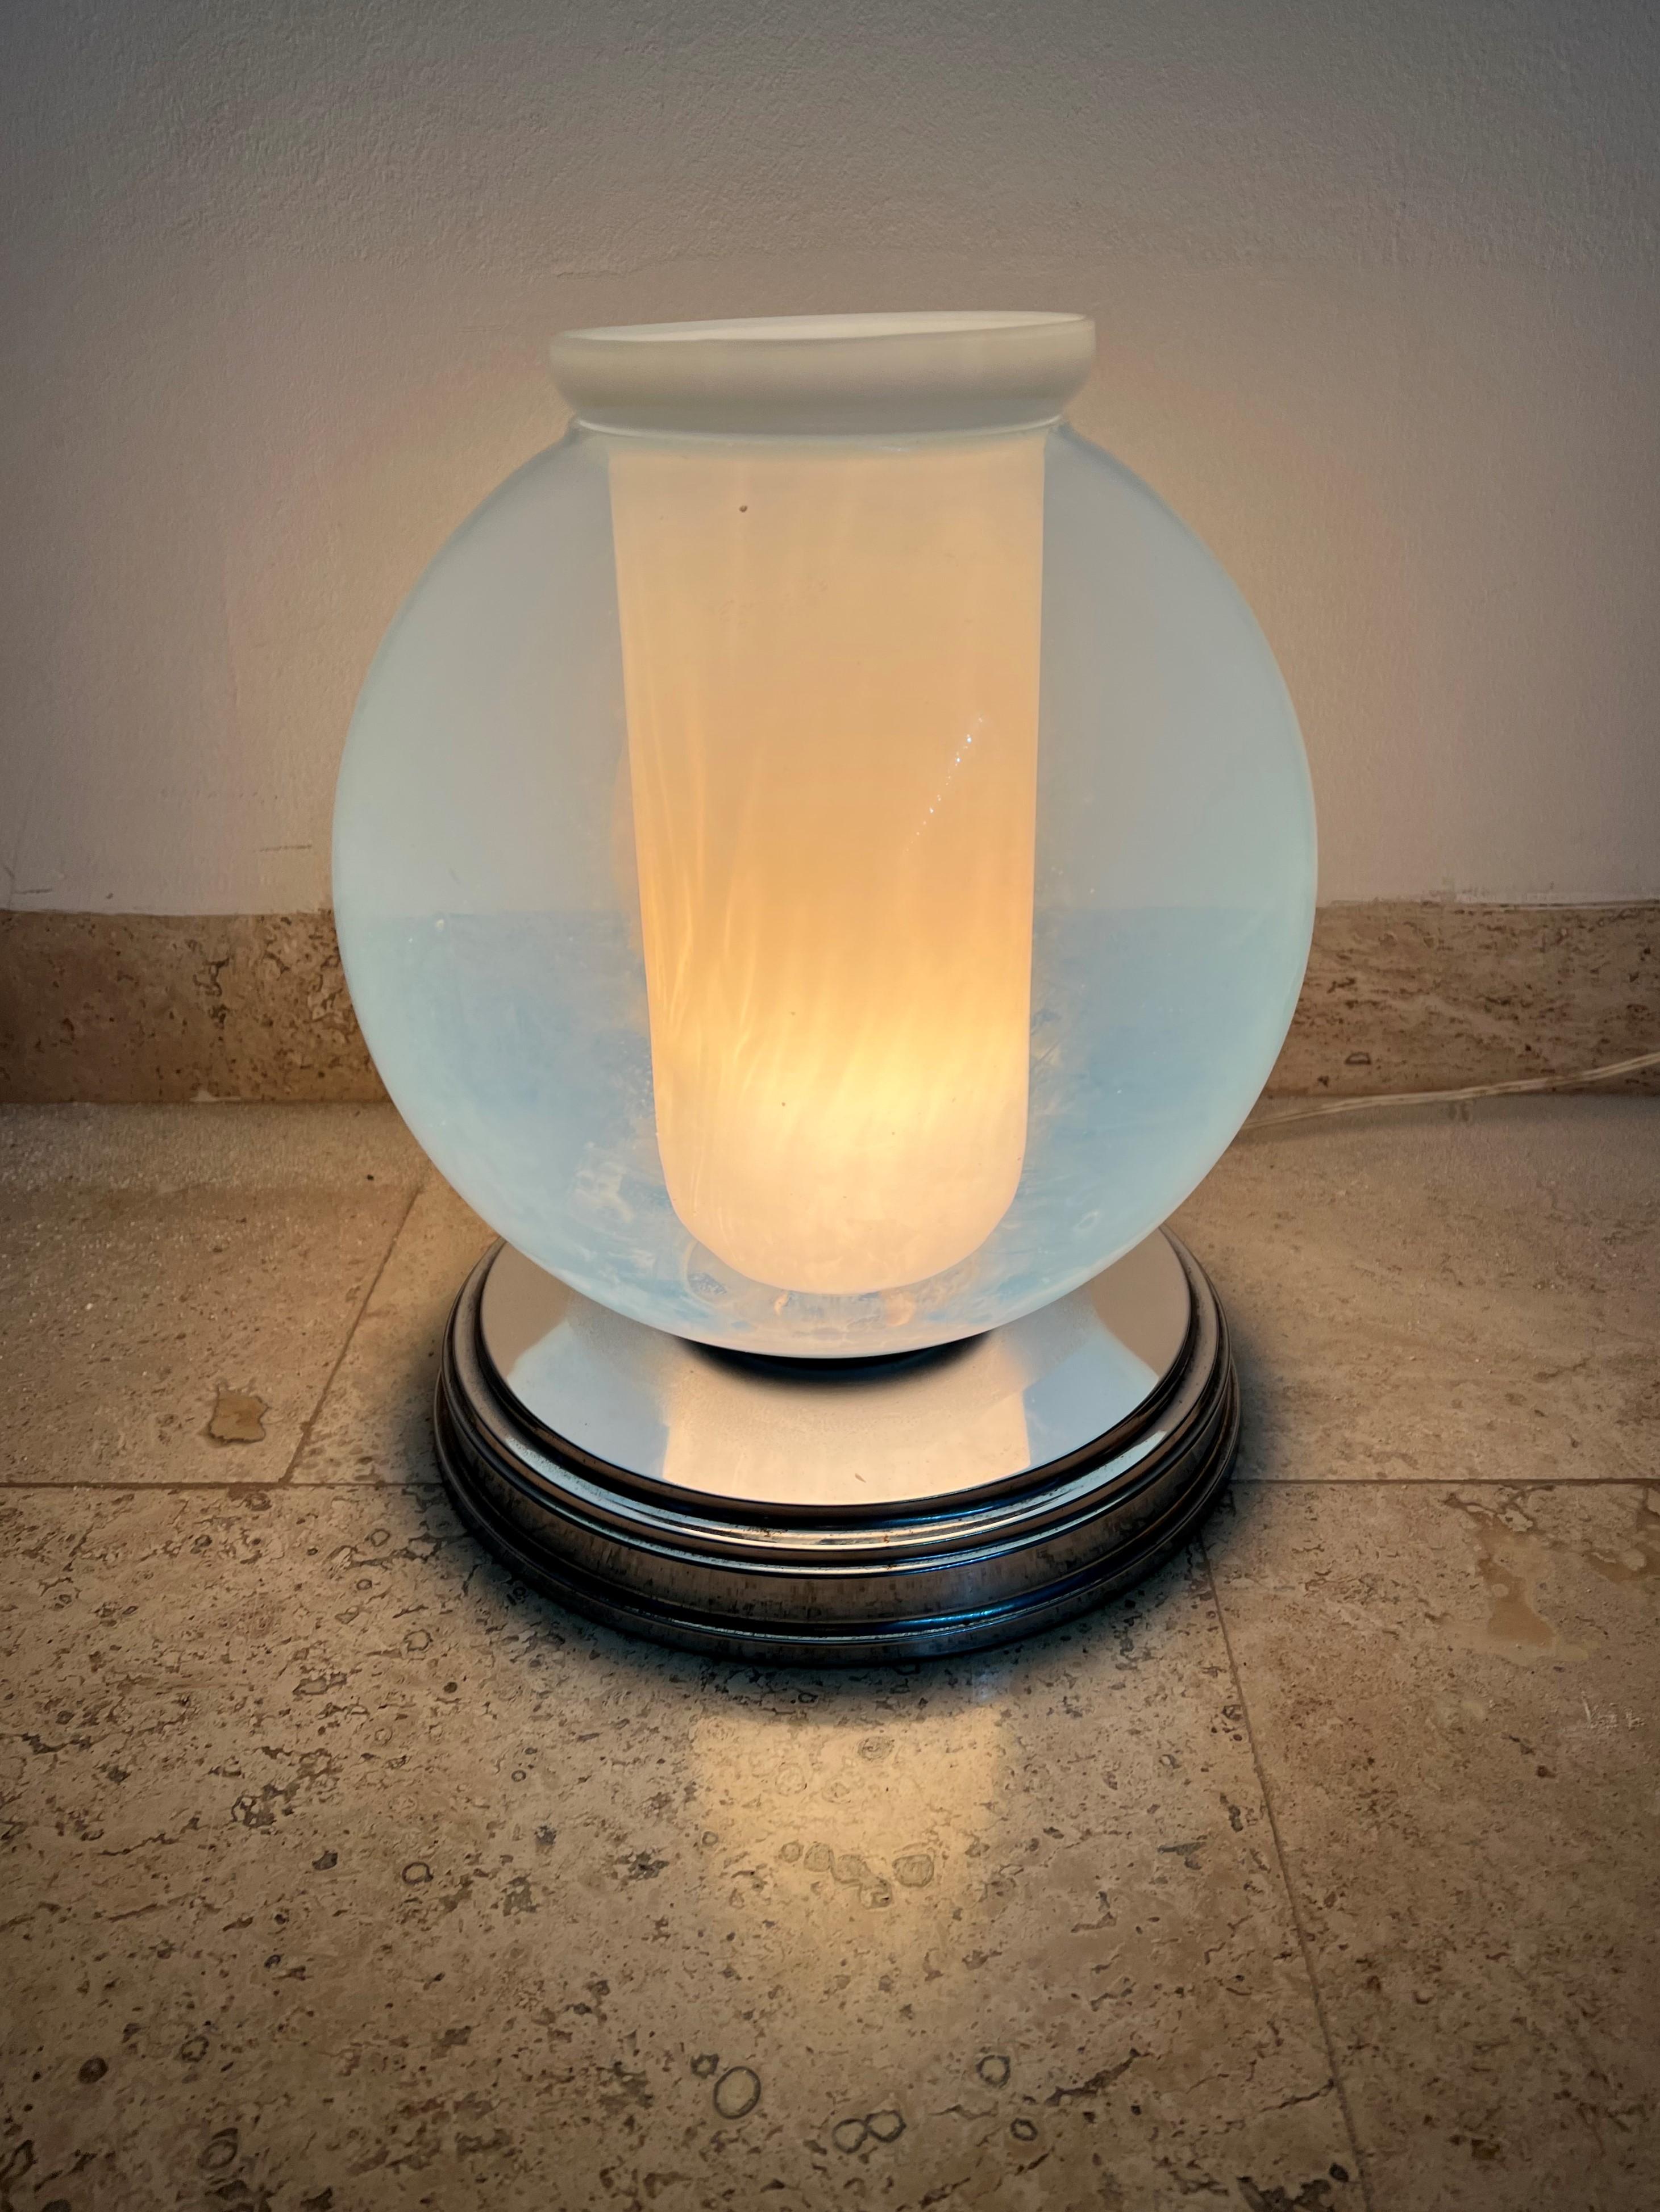 Space age one-light table lamp by Carlo Nason for Mazzega, circa 1970.
This lamp consists of 2 separate pieces in white and opalescent blue Murano glass.
 